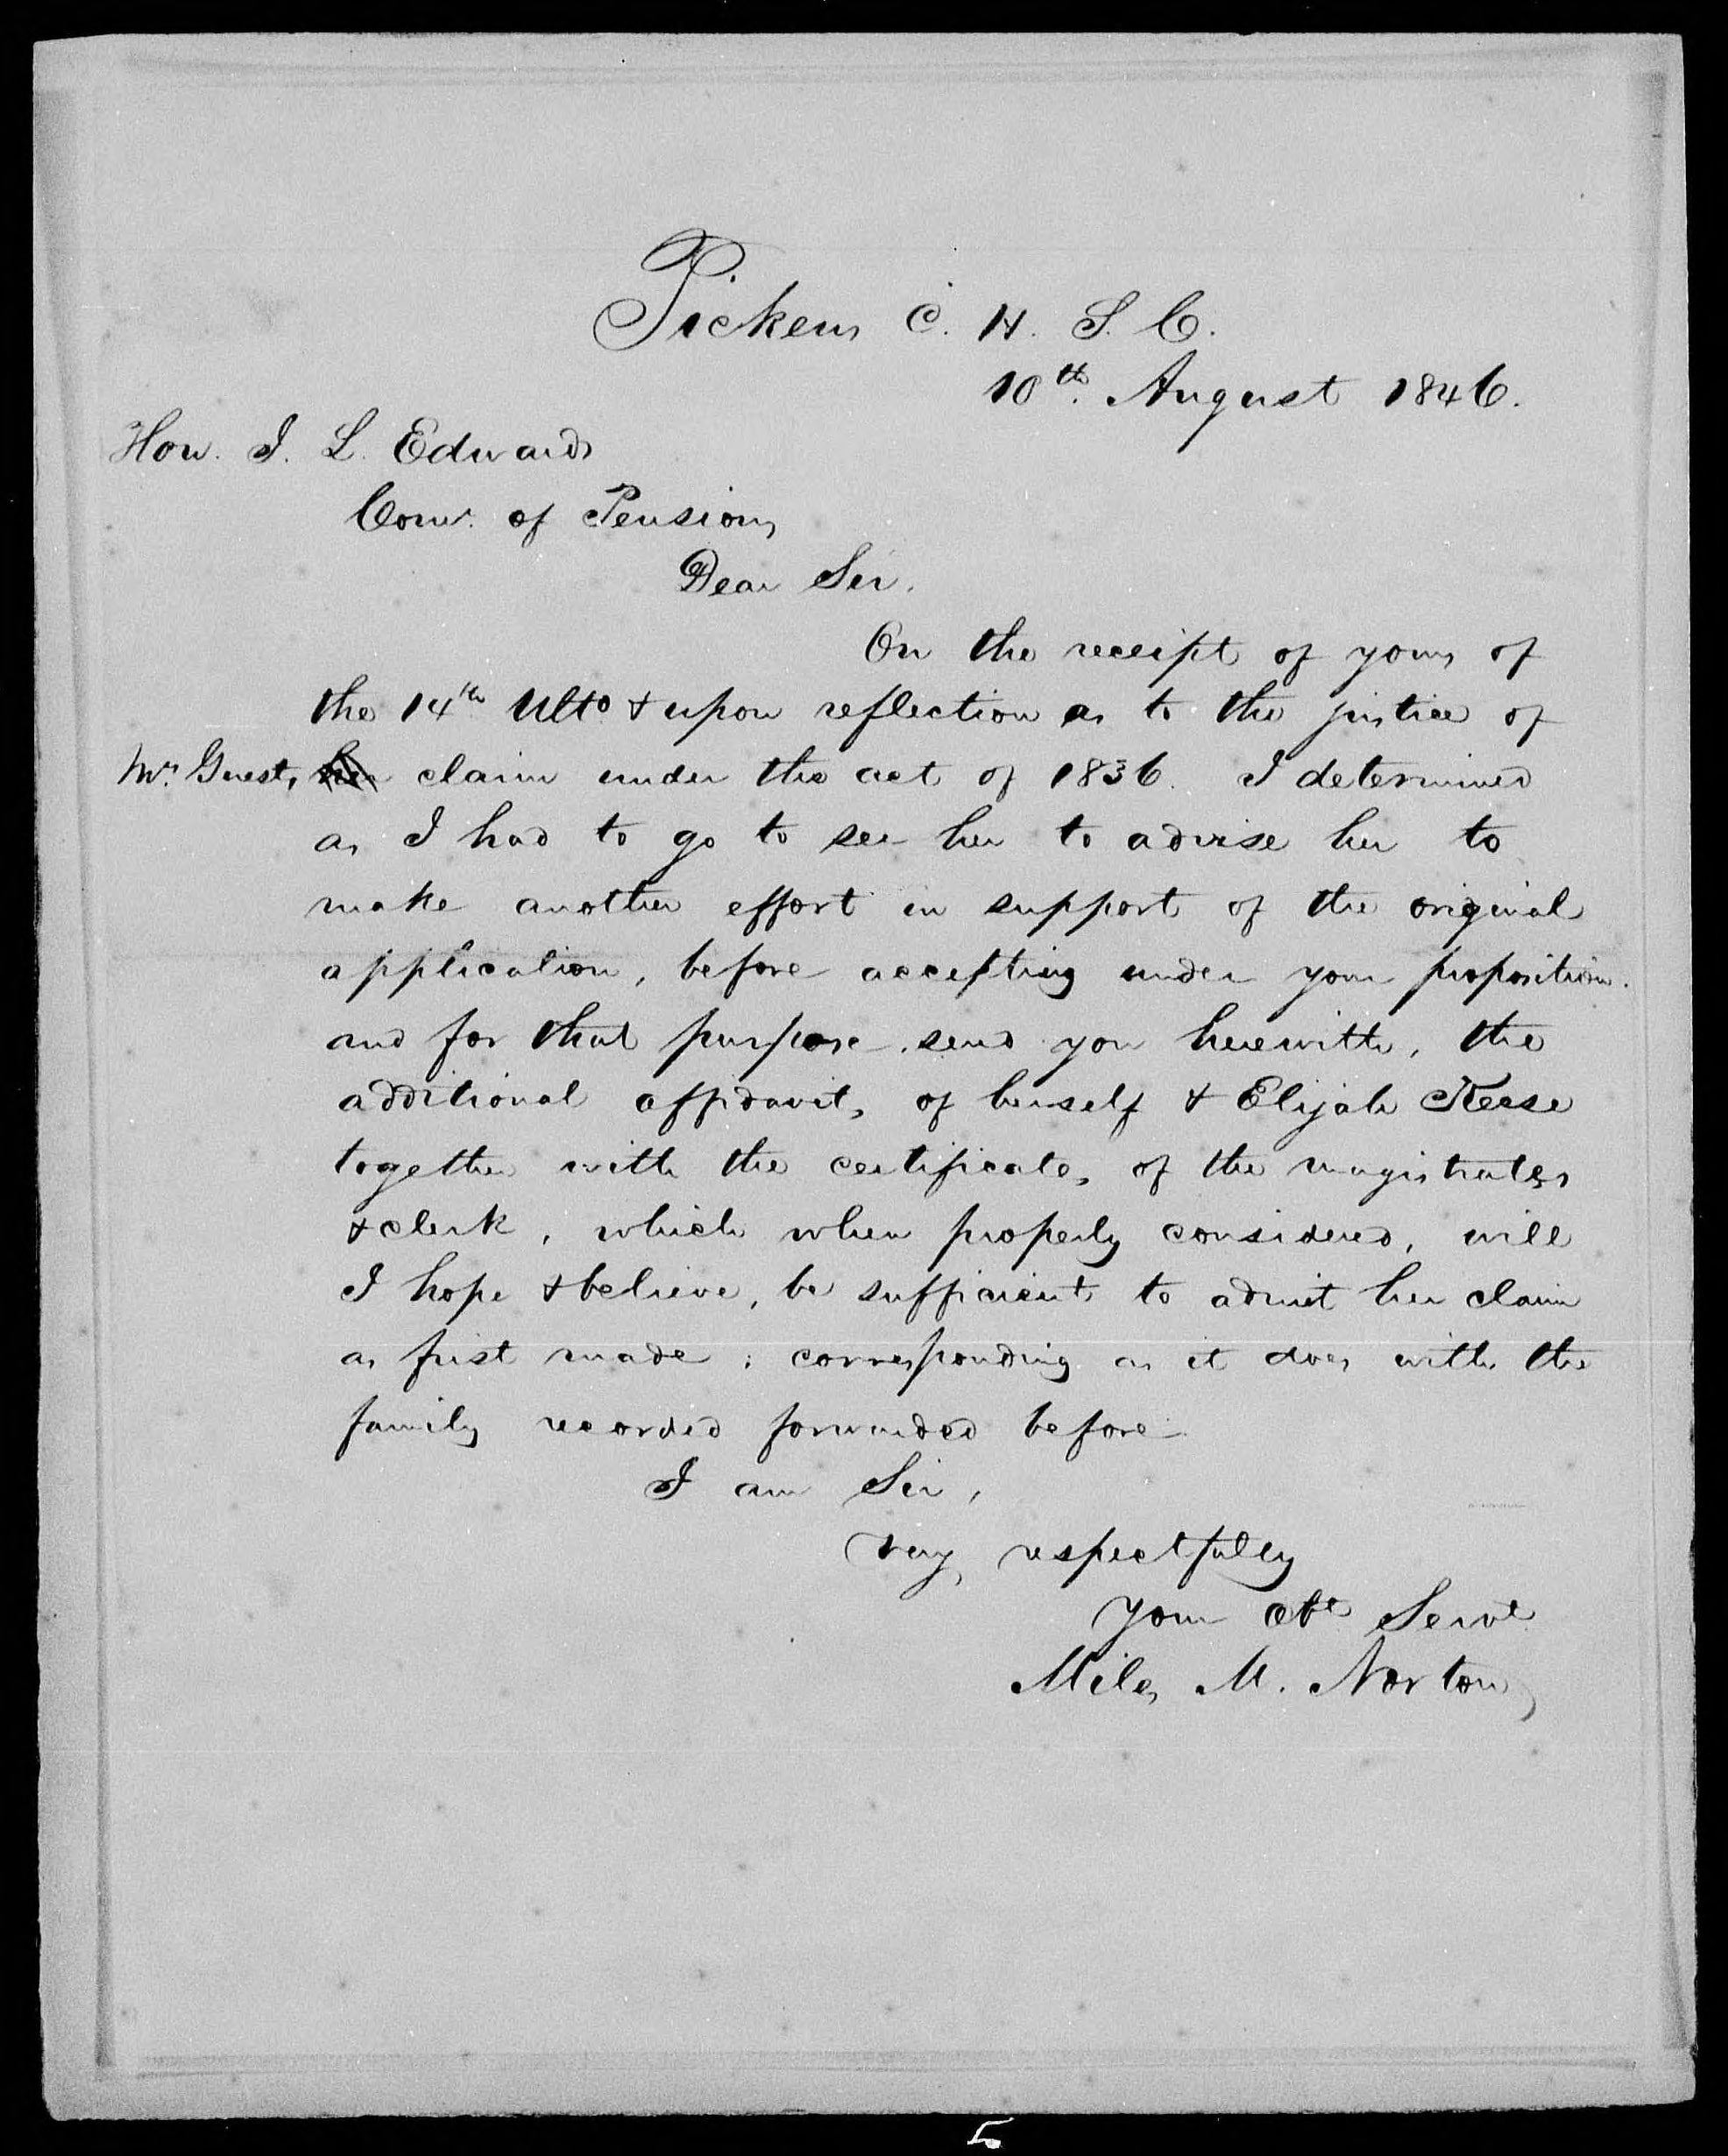 Letter from Miles M. Norton to James L. Edwards, 10 August 1846